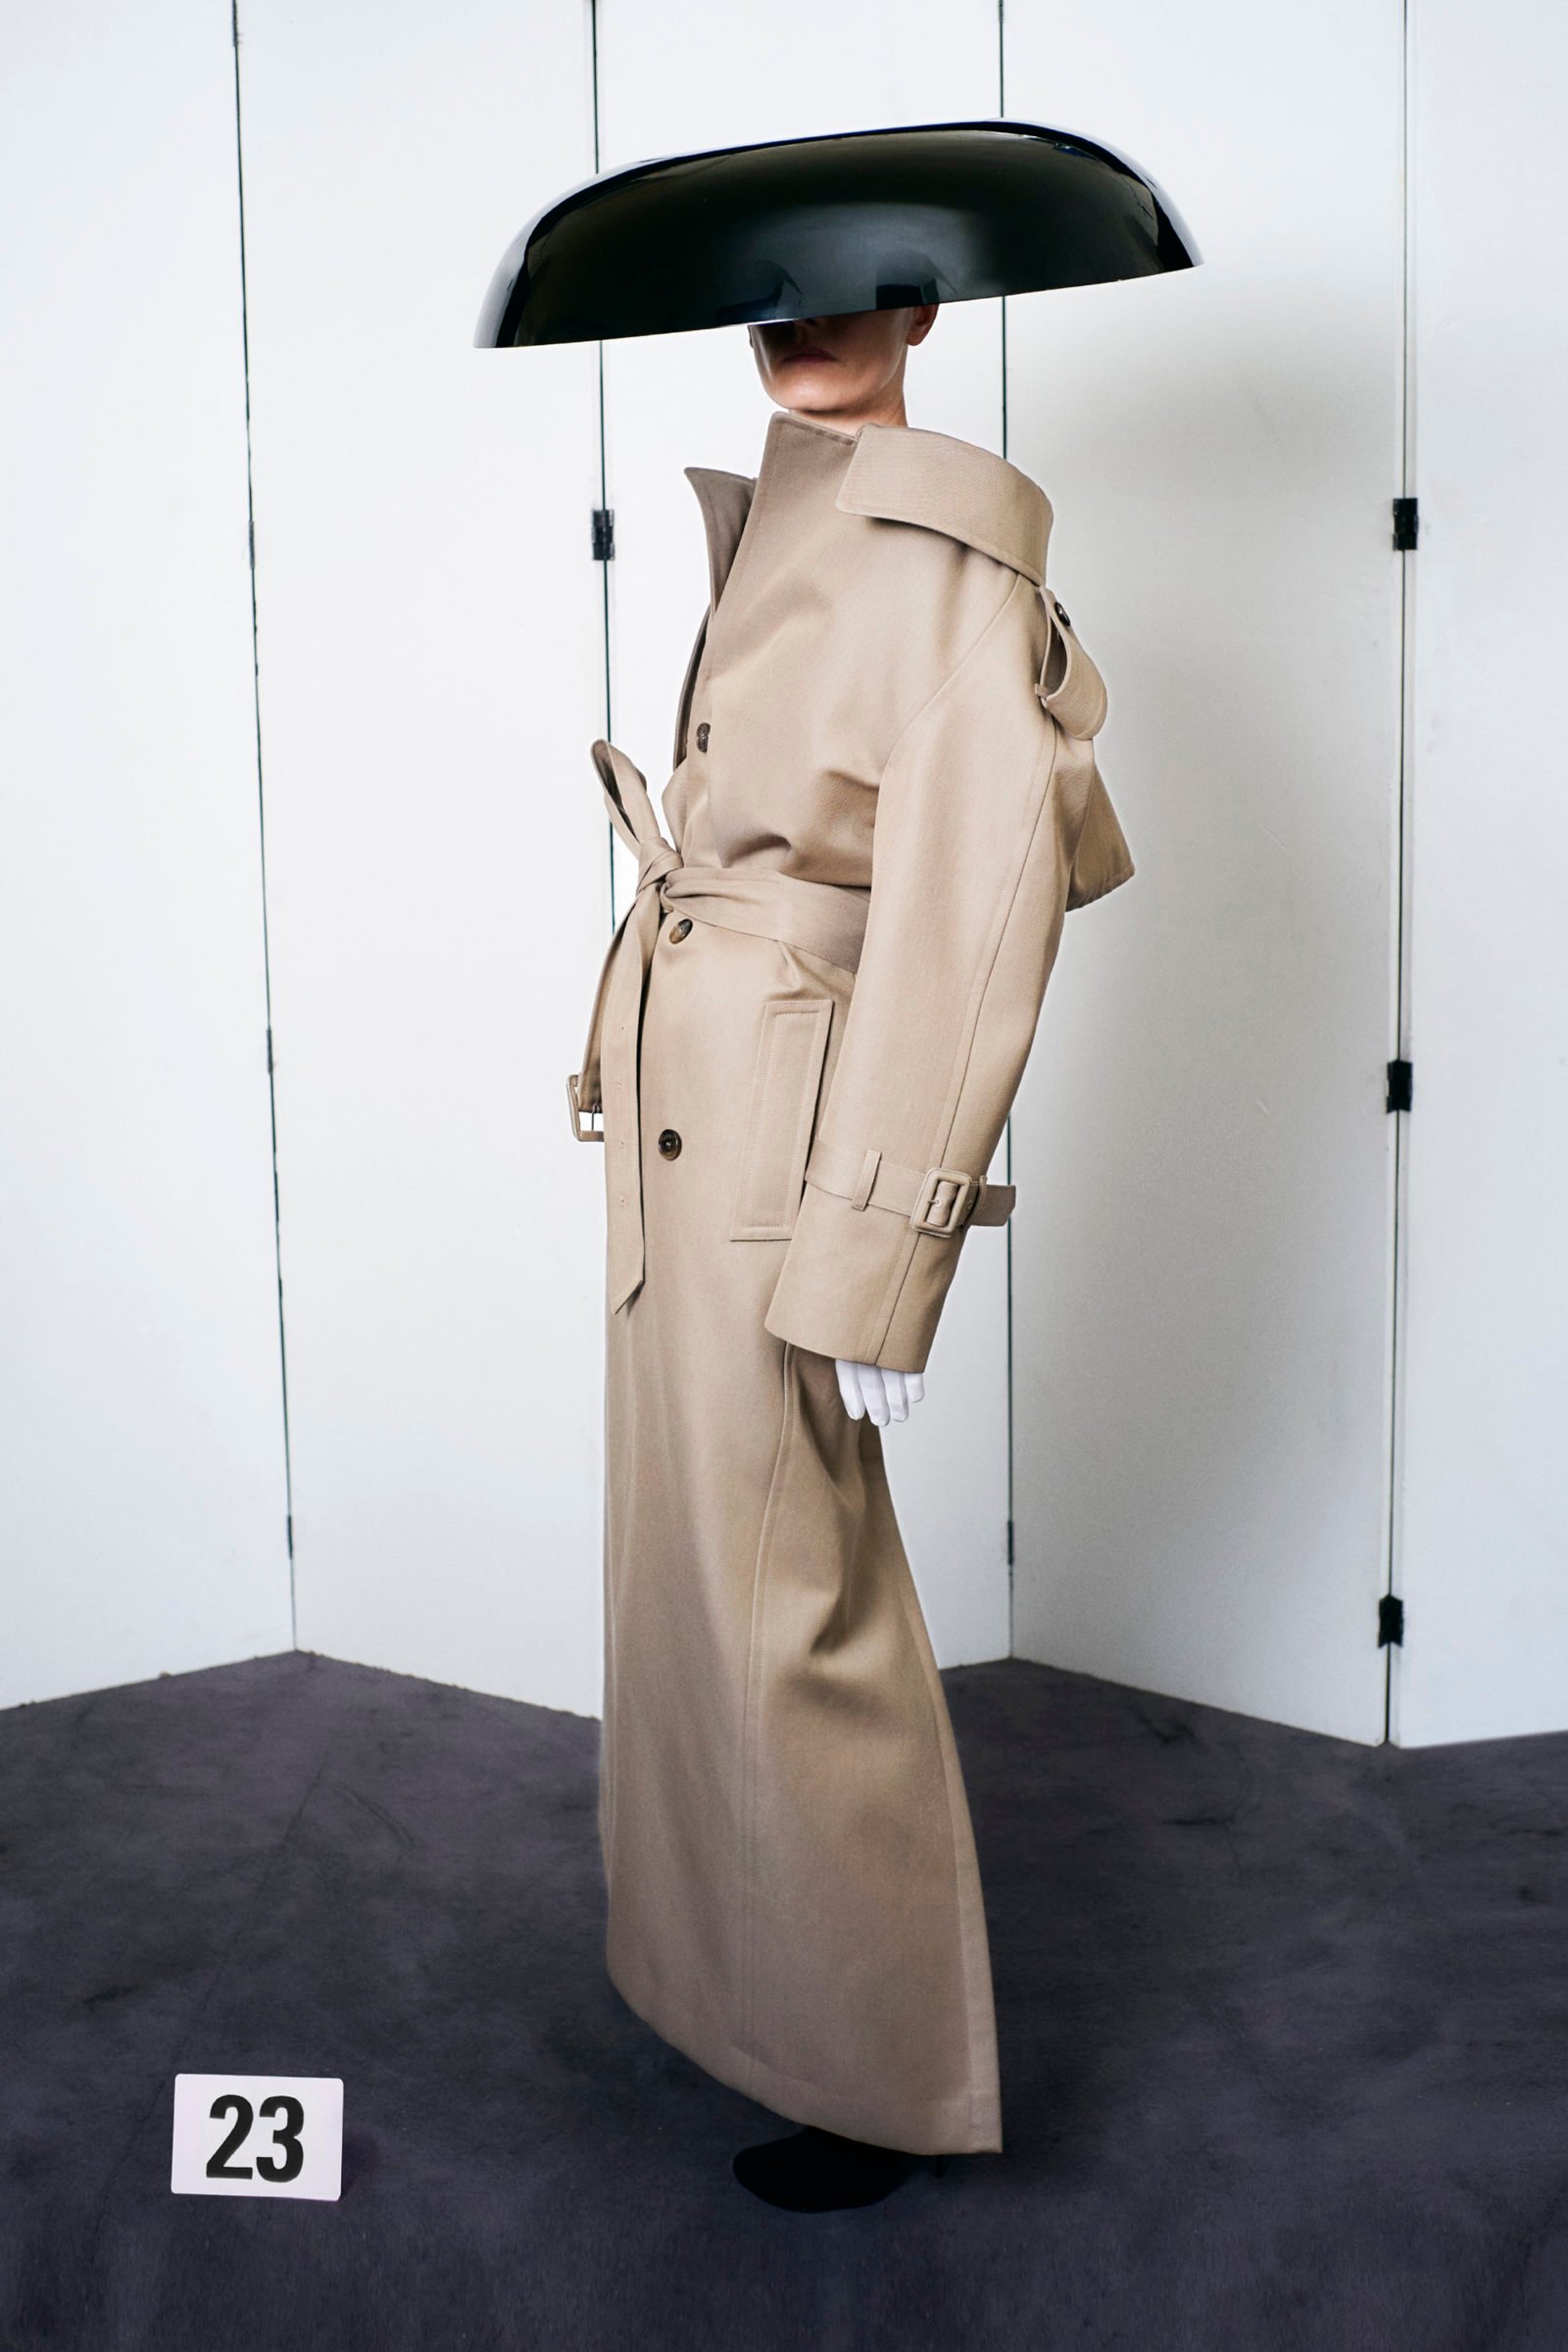 Balenciaga Fall 2021 Couture Collection: Worth the 53-Year Wait